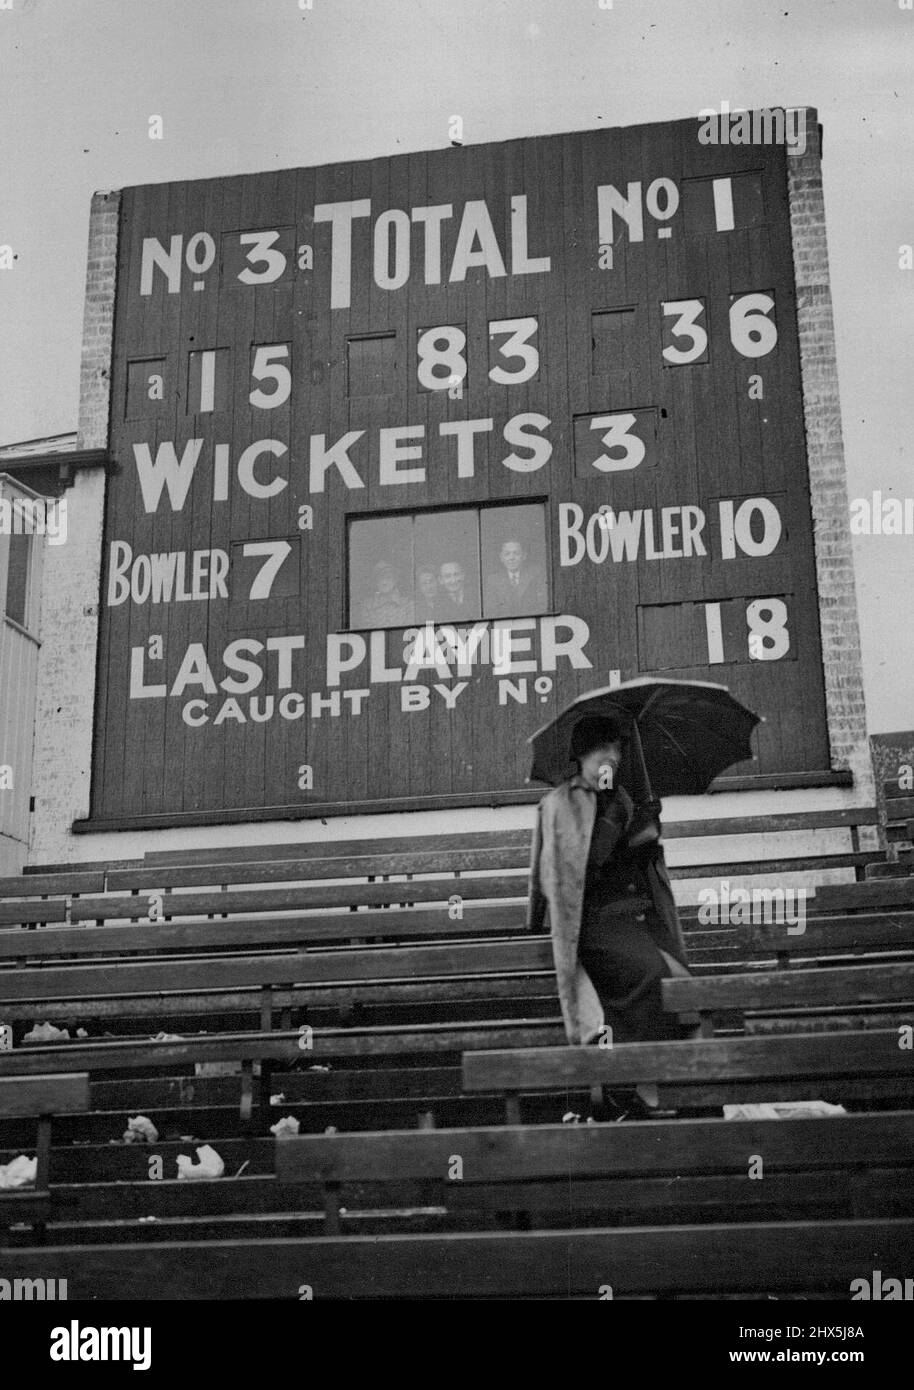 Cricket At Sheffield - Only 67 Runs Wanted For Victory By Yorkshire - Then Rain Stops Play -- A lone spectator beneath the dramatic score-board at Sheffield yesterday, which shows how near Australia were to defeat. The prospect of the first defeat of the tour and the first beating by a county side since 1912 for the Australians was the outstanding topic in cricket yesterday. Yorkshire, the champion county, with all their second wickets in hand, needed 150 runs to beat the Australians, when play was resumed on a damp wicket at Sheffield yesterday. July 6, 1938. (Photo by Topical Press). Stock Photo